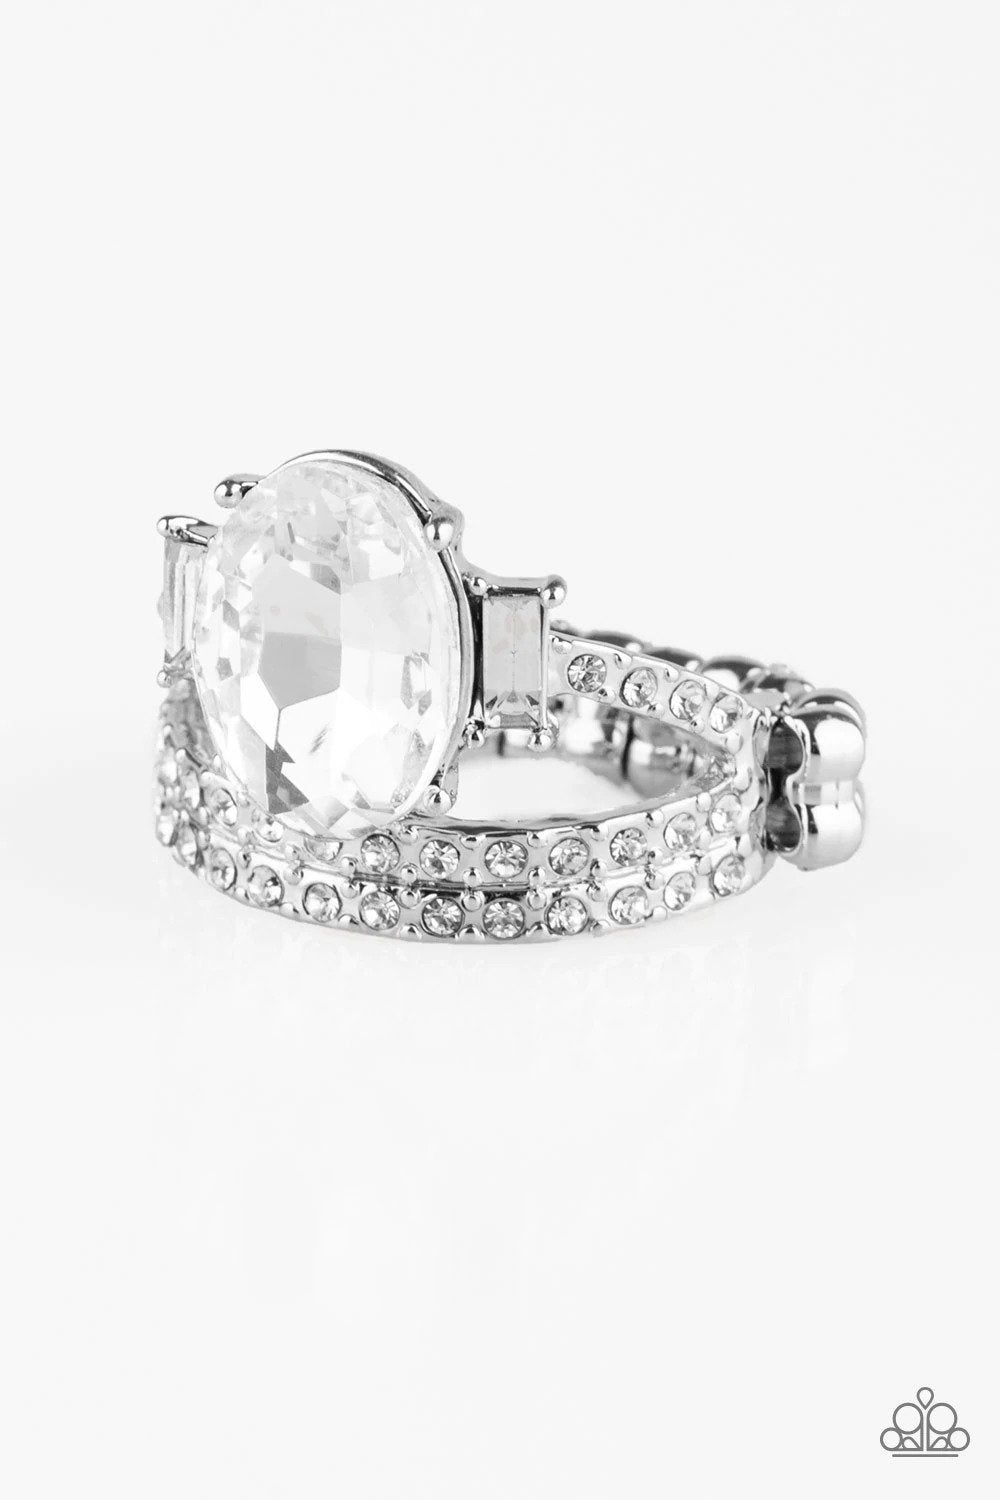 Bling Queen White Ring - Paparazzi Accessories- lightbox - CarasShop.com - $5 Jewelry by Cara Jewels